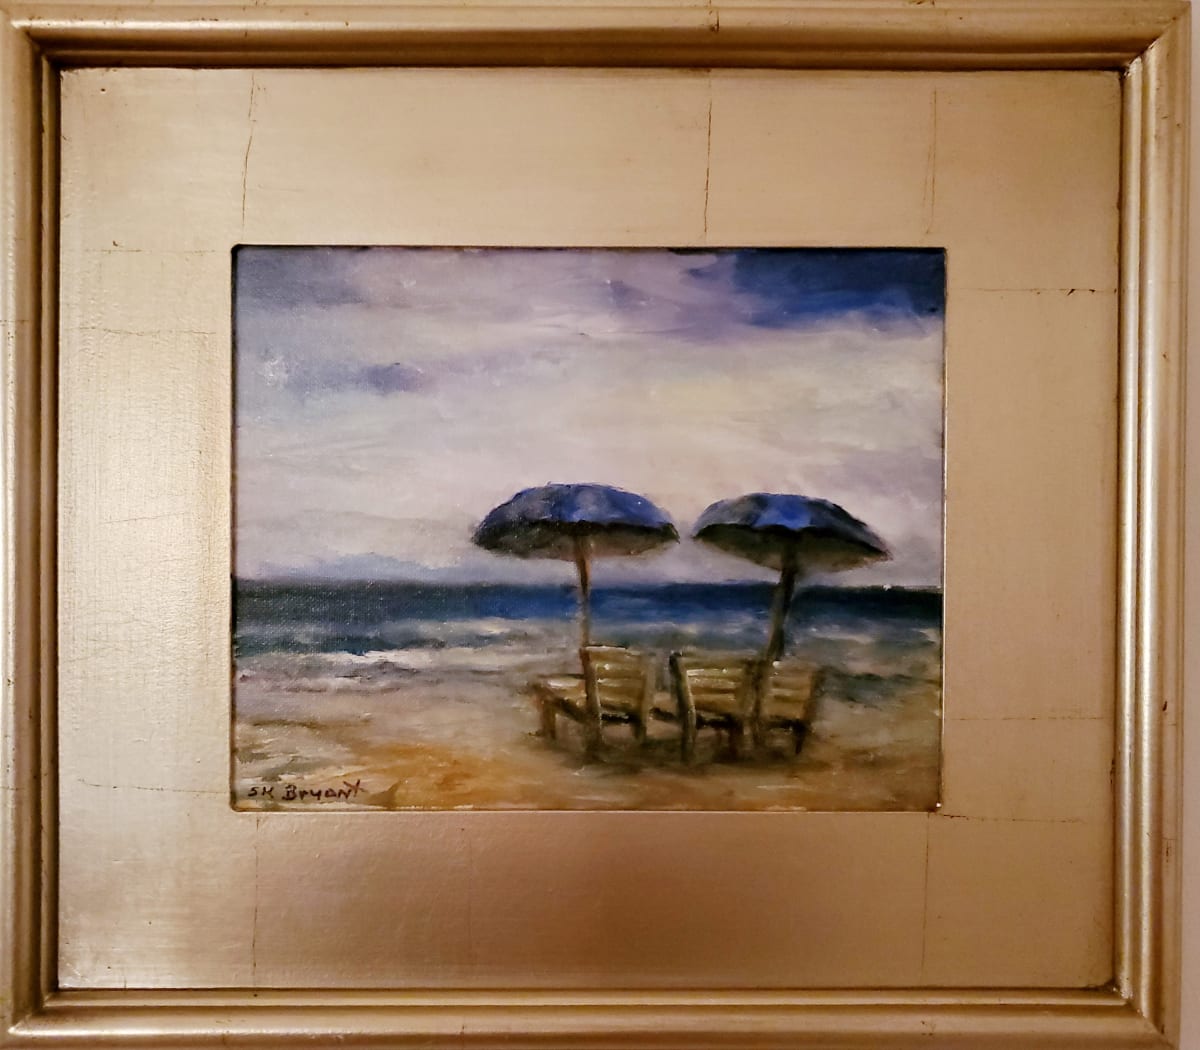 Two Umbrellas (SOLD) by Susan Bryant  Image: End of summer at Isle of Palms, South Carolina